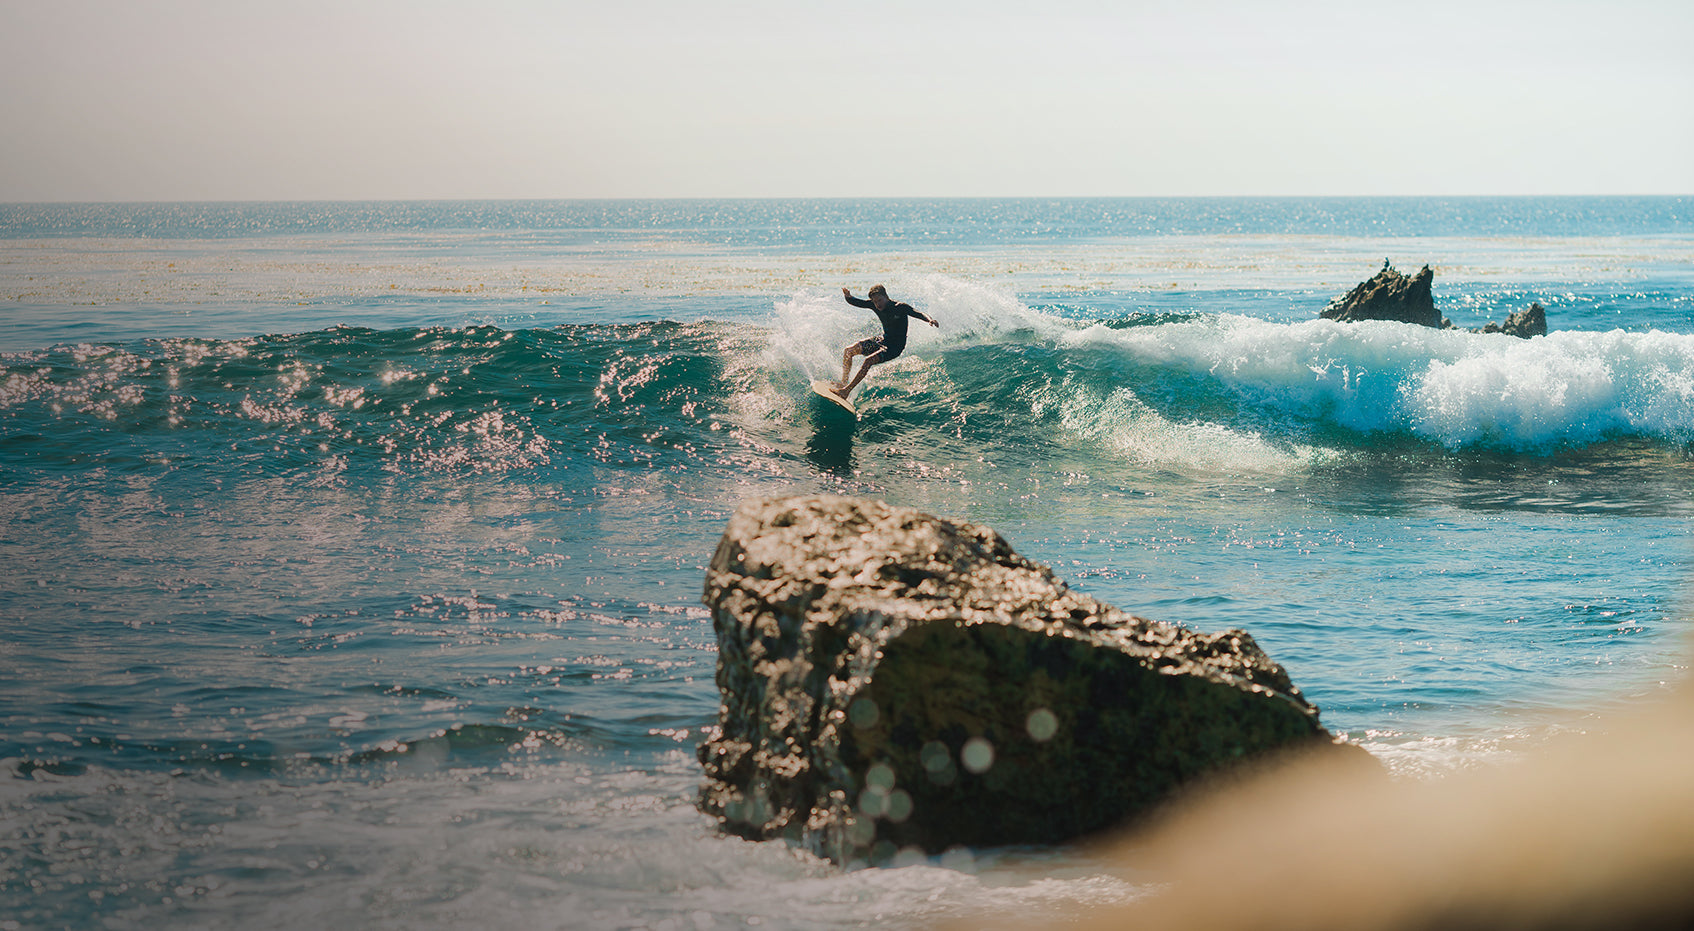 Surfing Stock Video Footage for Free Download